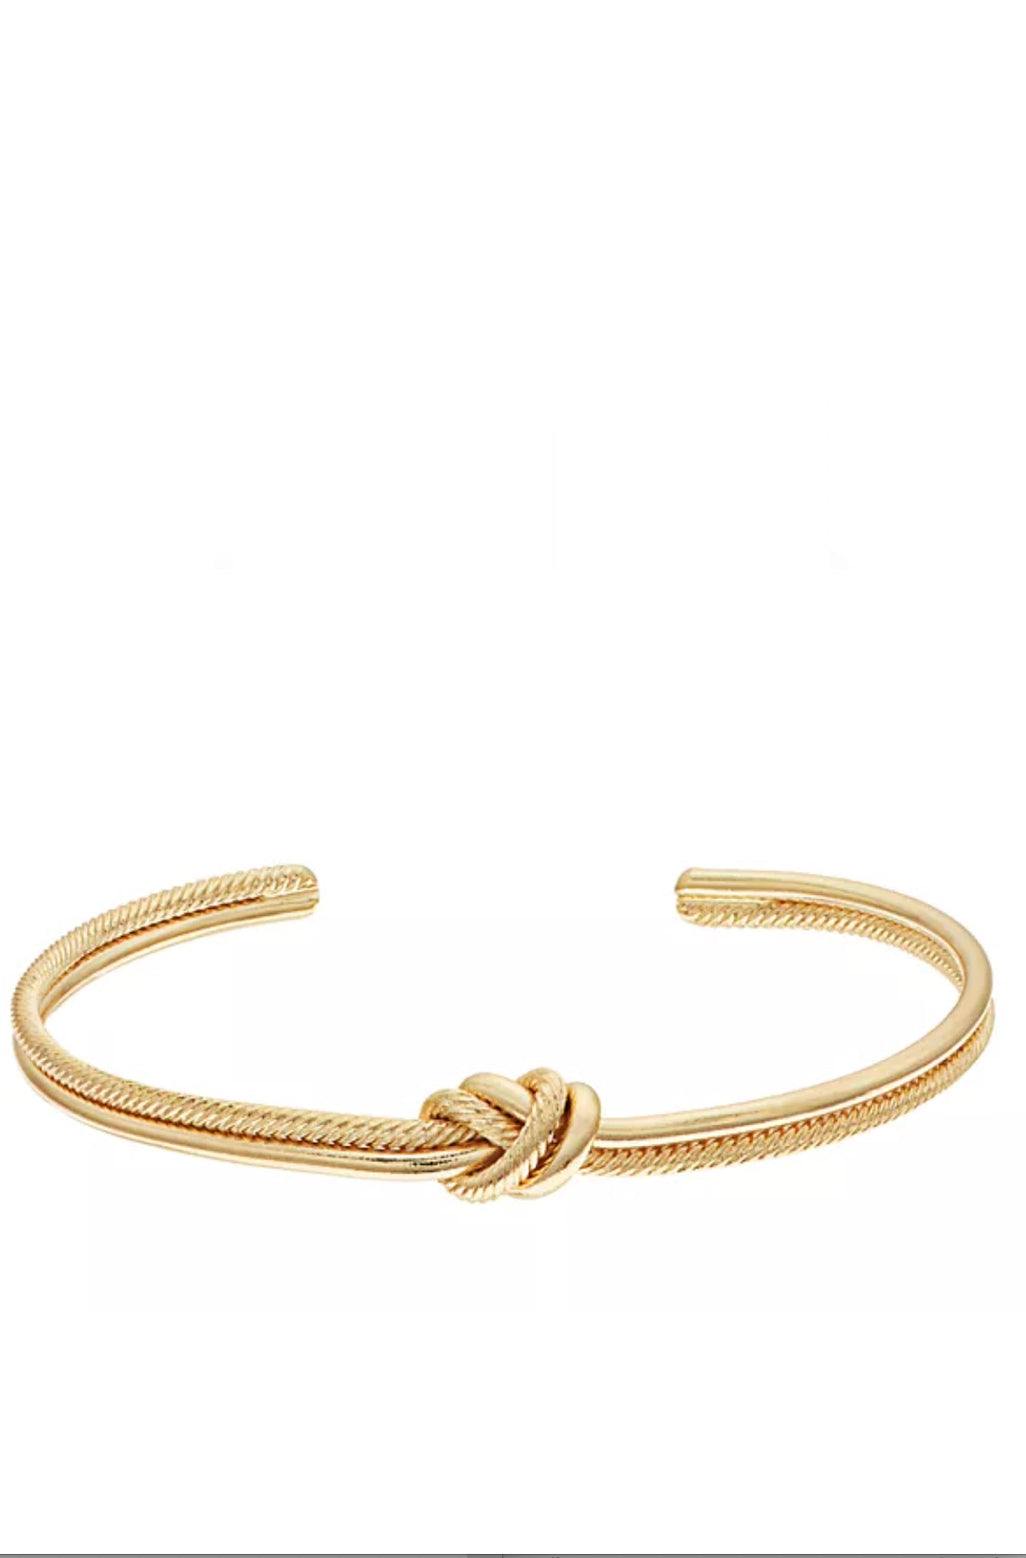 18k Gold knotted Bangle